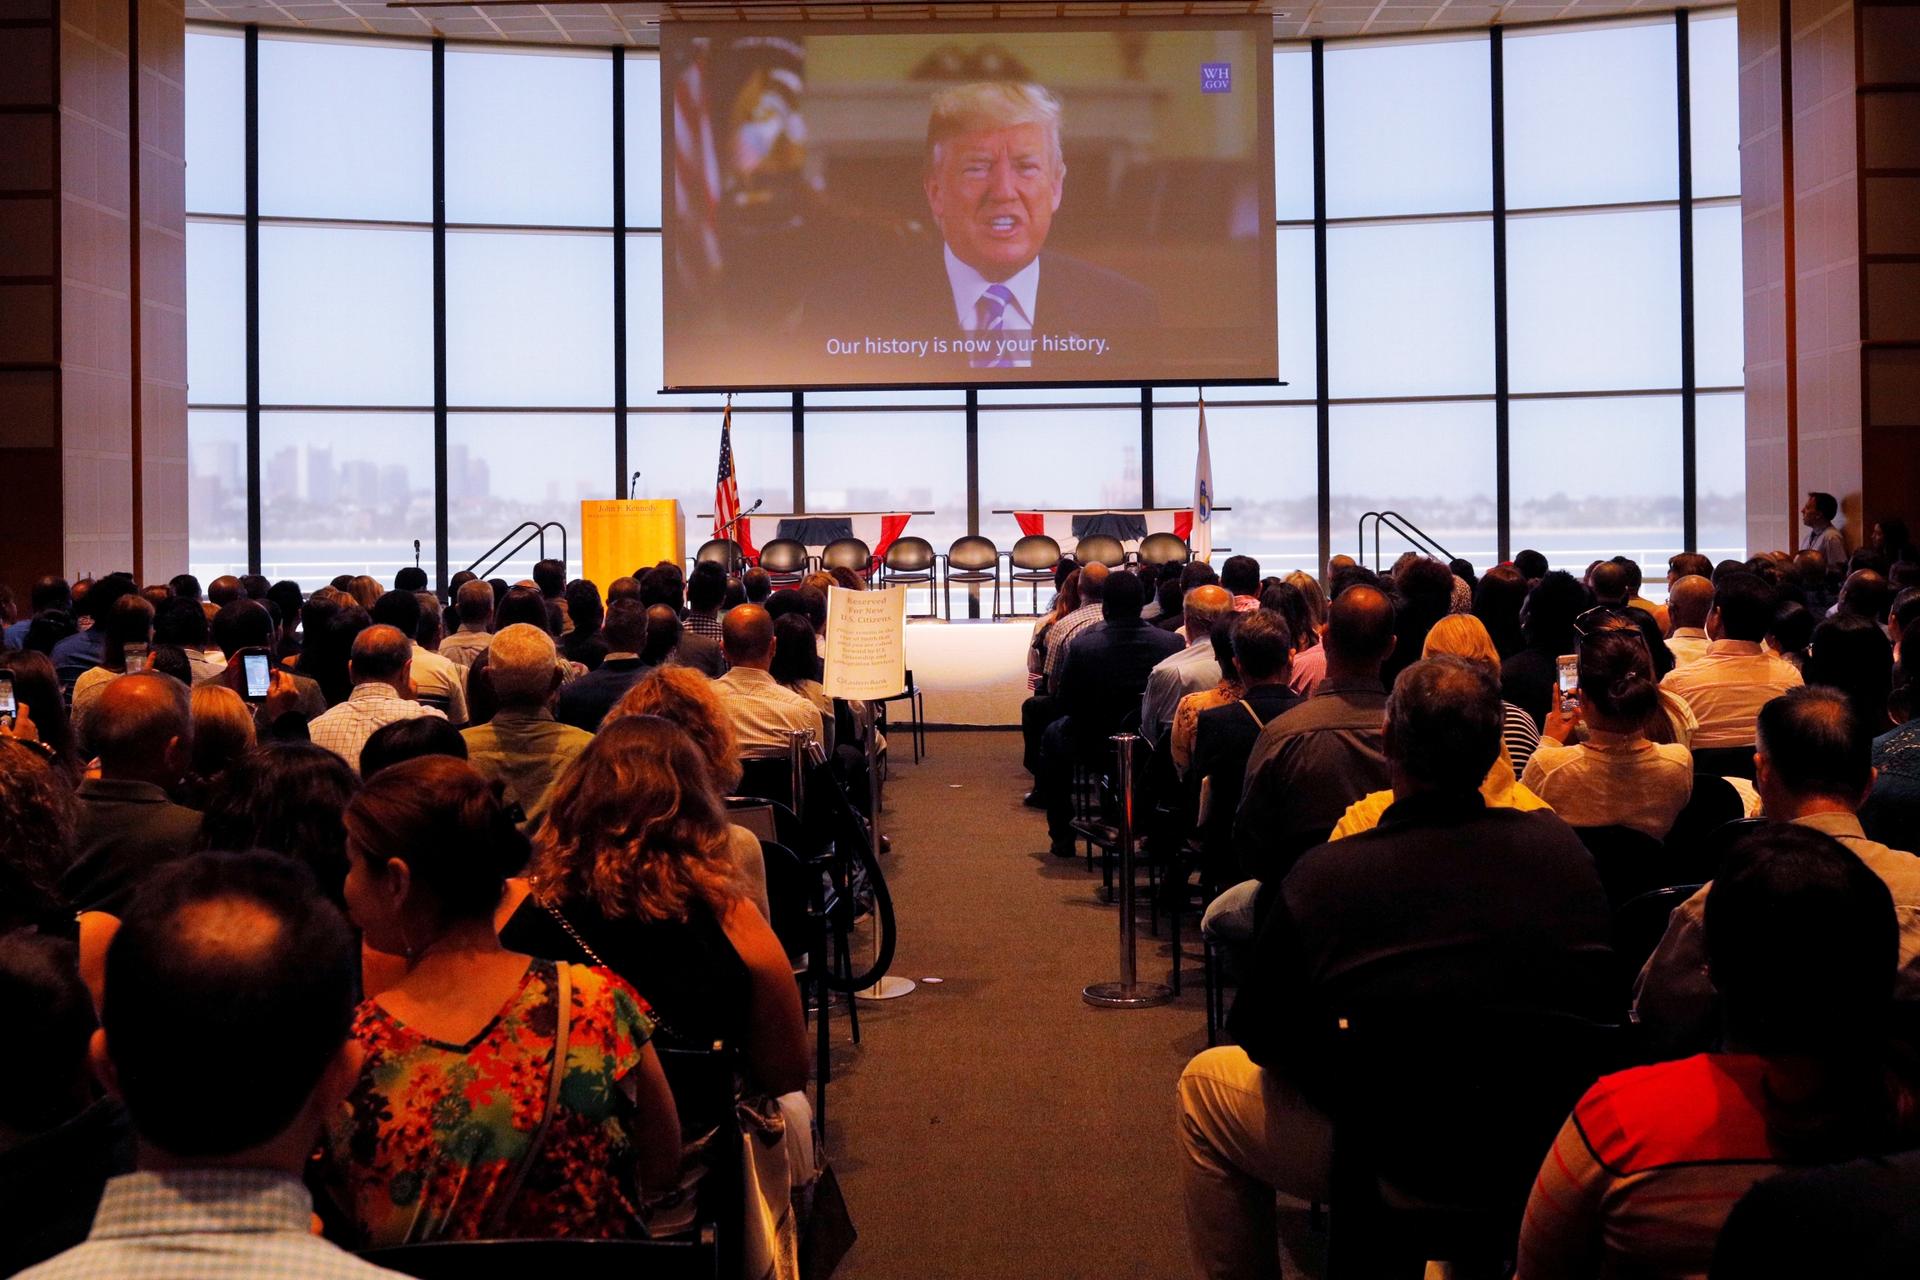 A welcome statement from US President Donald Trump is played after a citizenship ceremony at the John F. Kennedy Presidential Library in Boston, Massachusetts, on July 18, 2018.